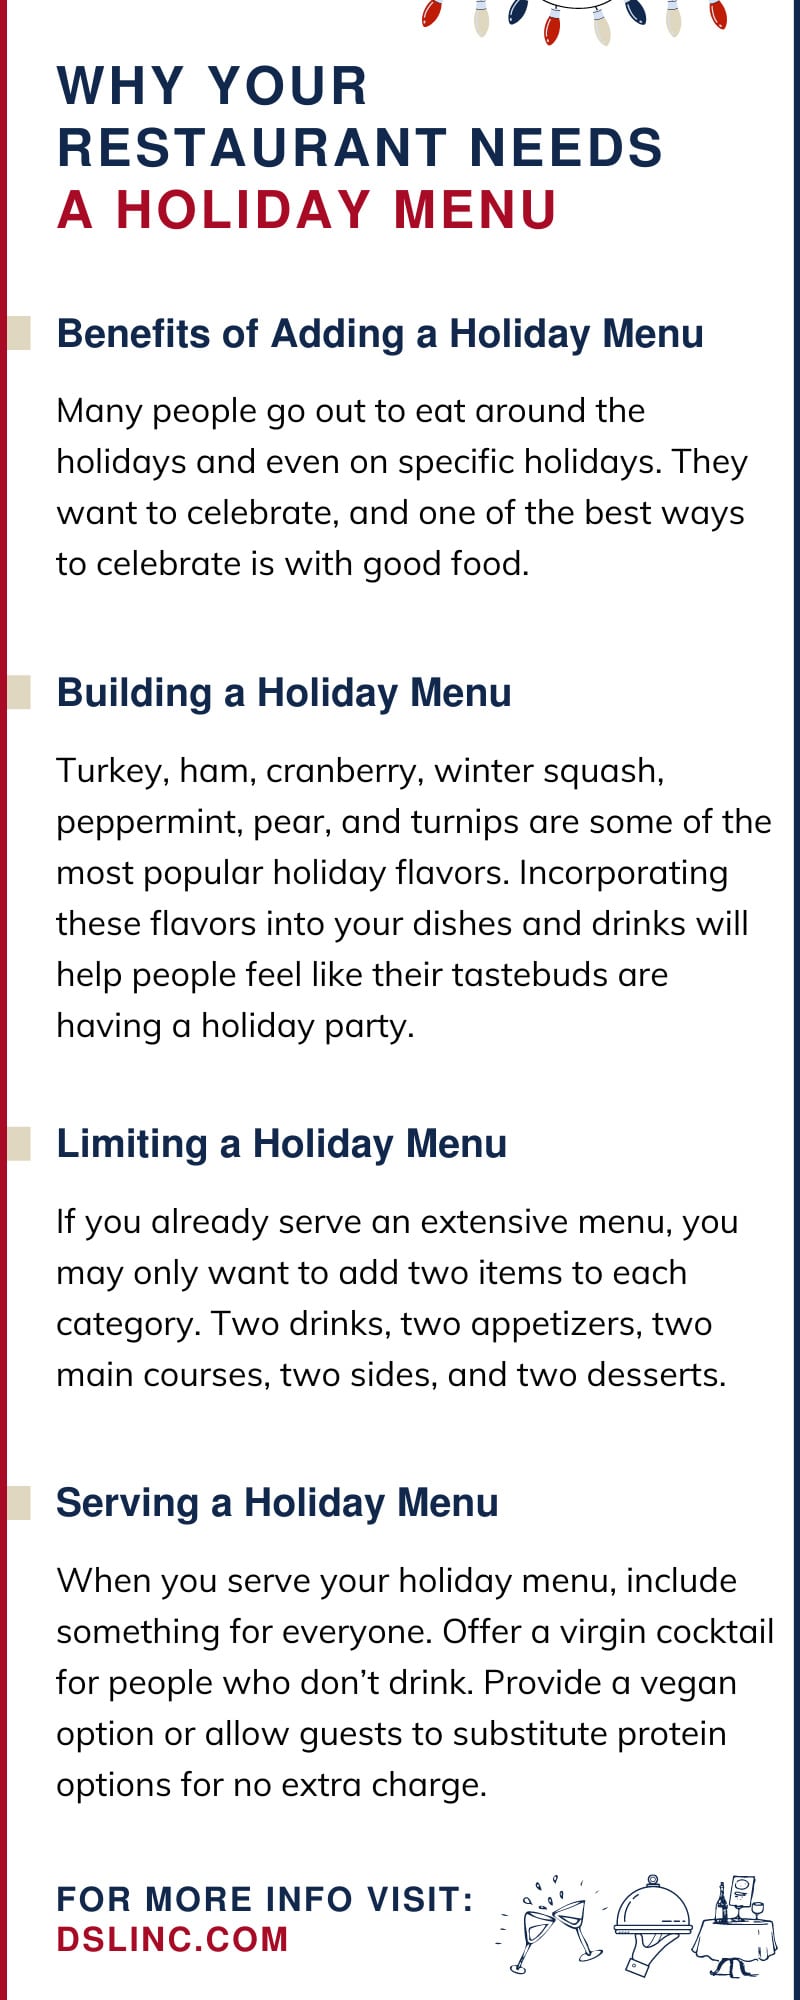 Why Your Restaurant Needs a Holiday Menu